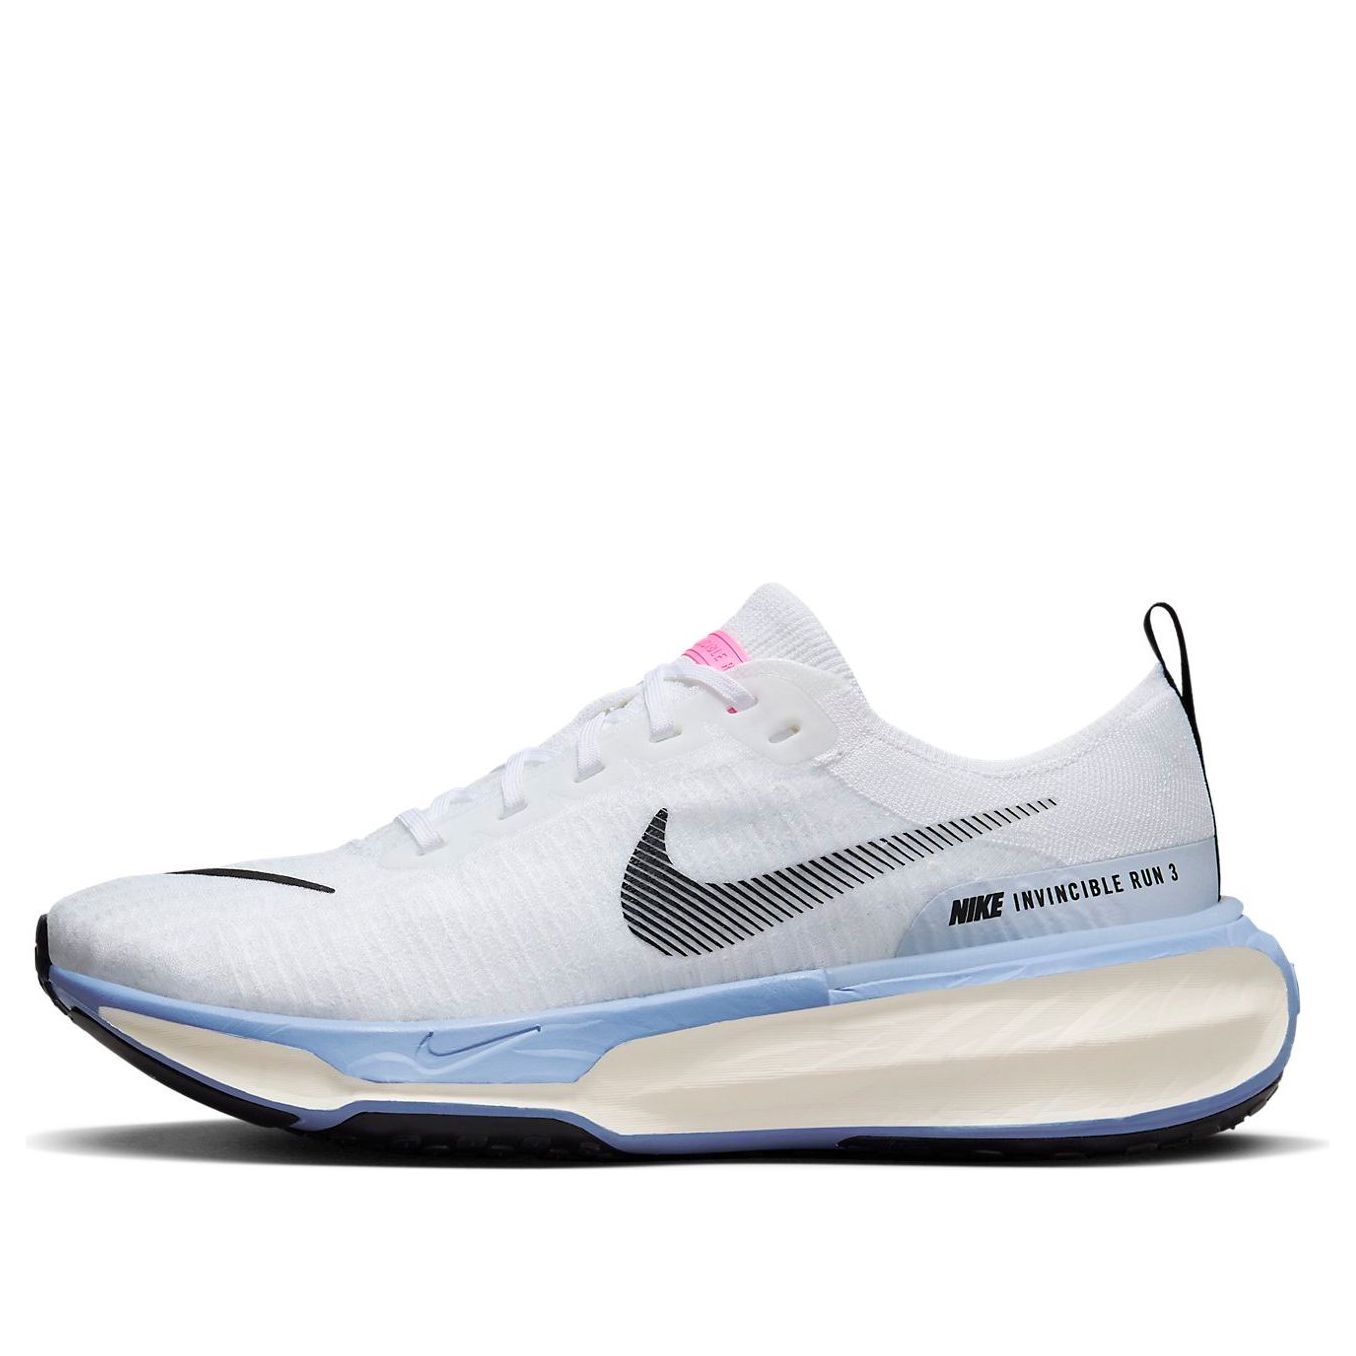 Nike ZoomX Invincible Run Flyknit 3 'White Cobalt Bliss' DR2615-100